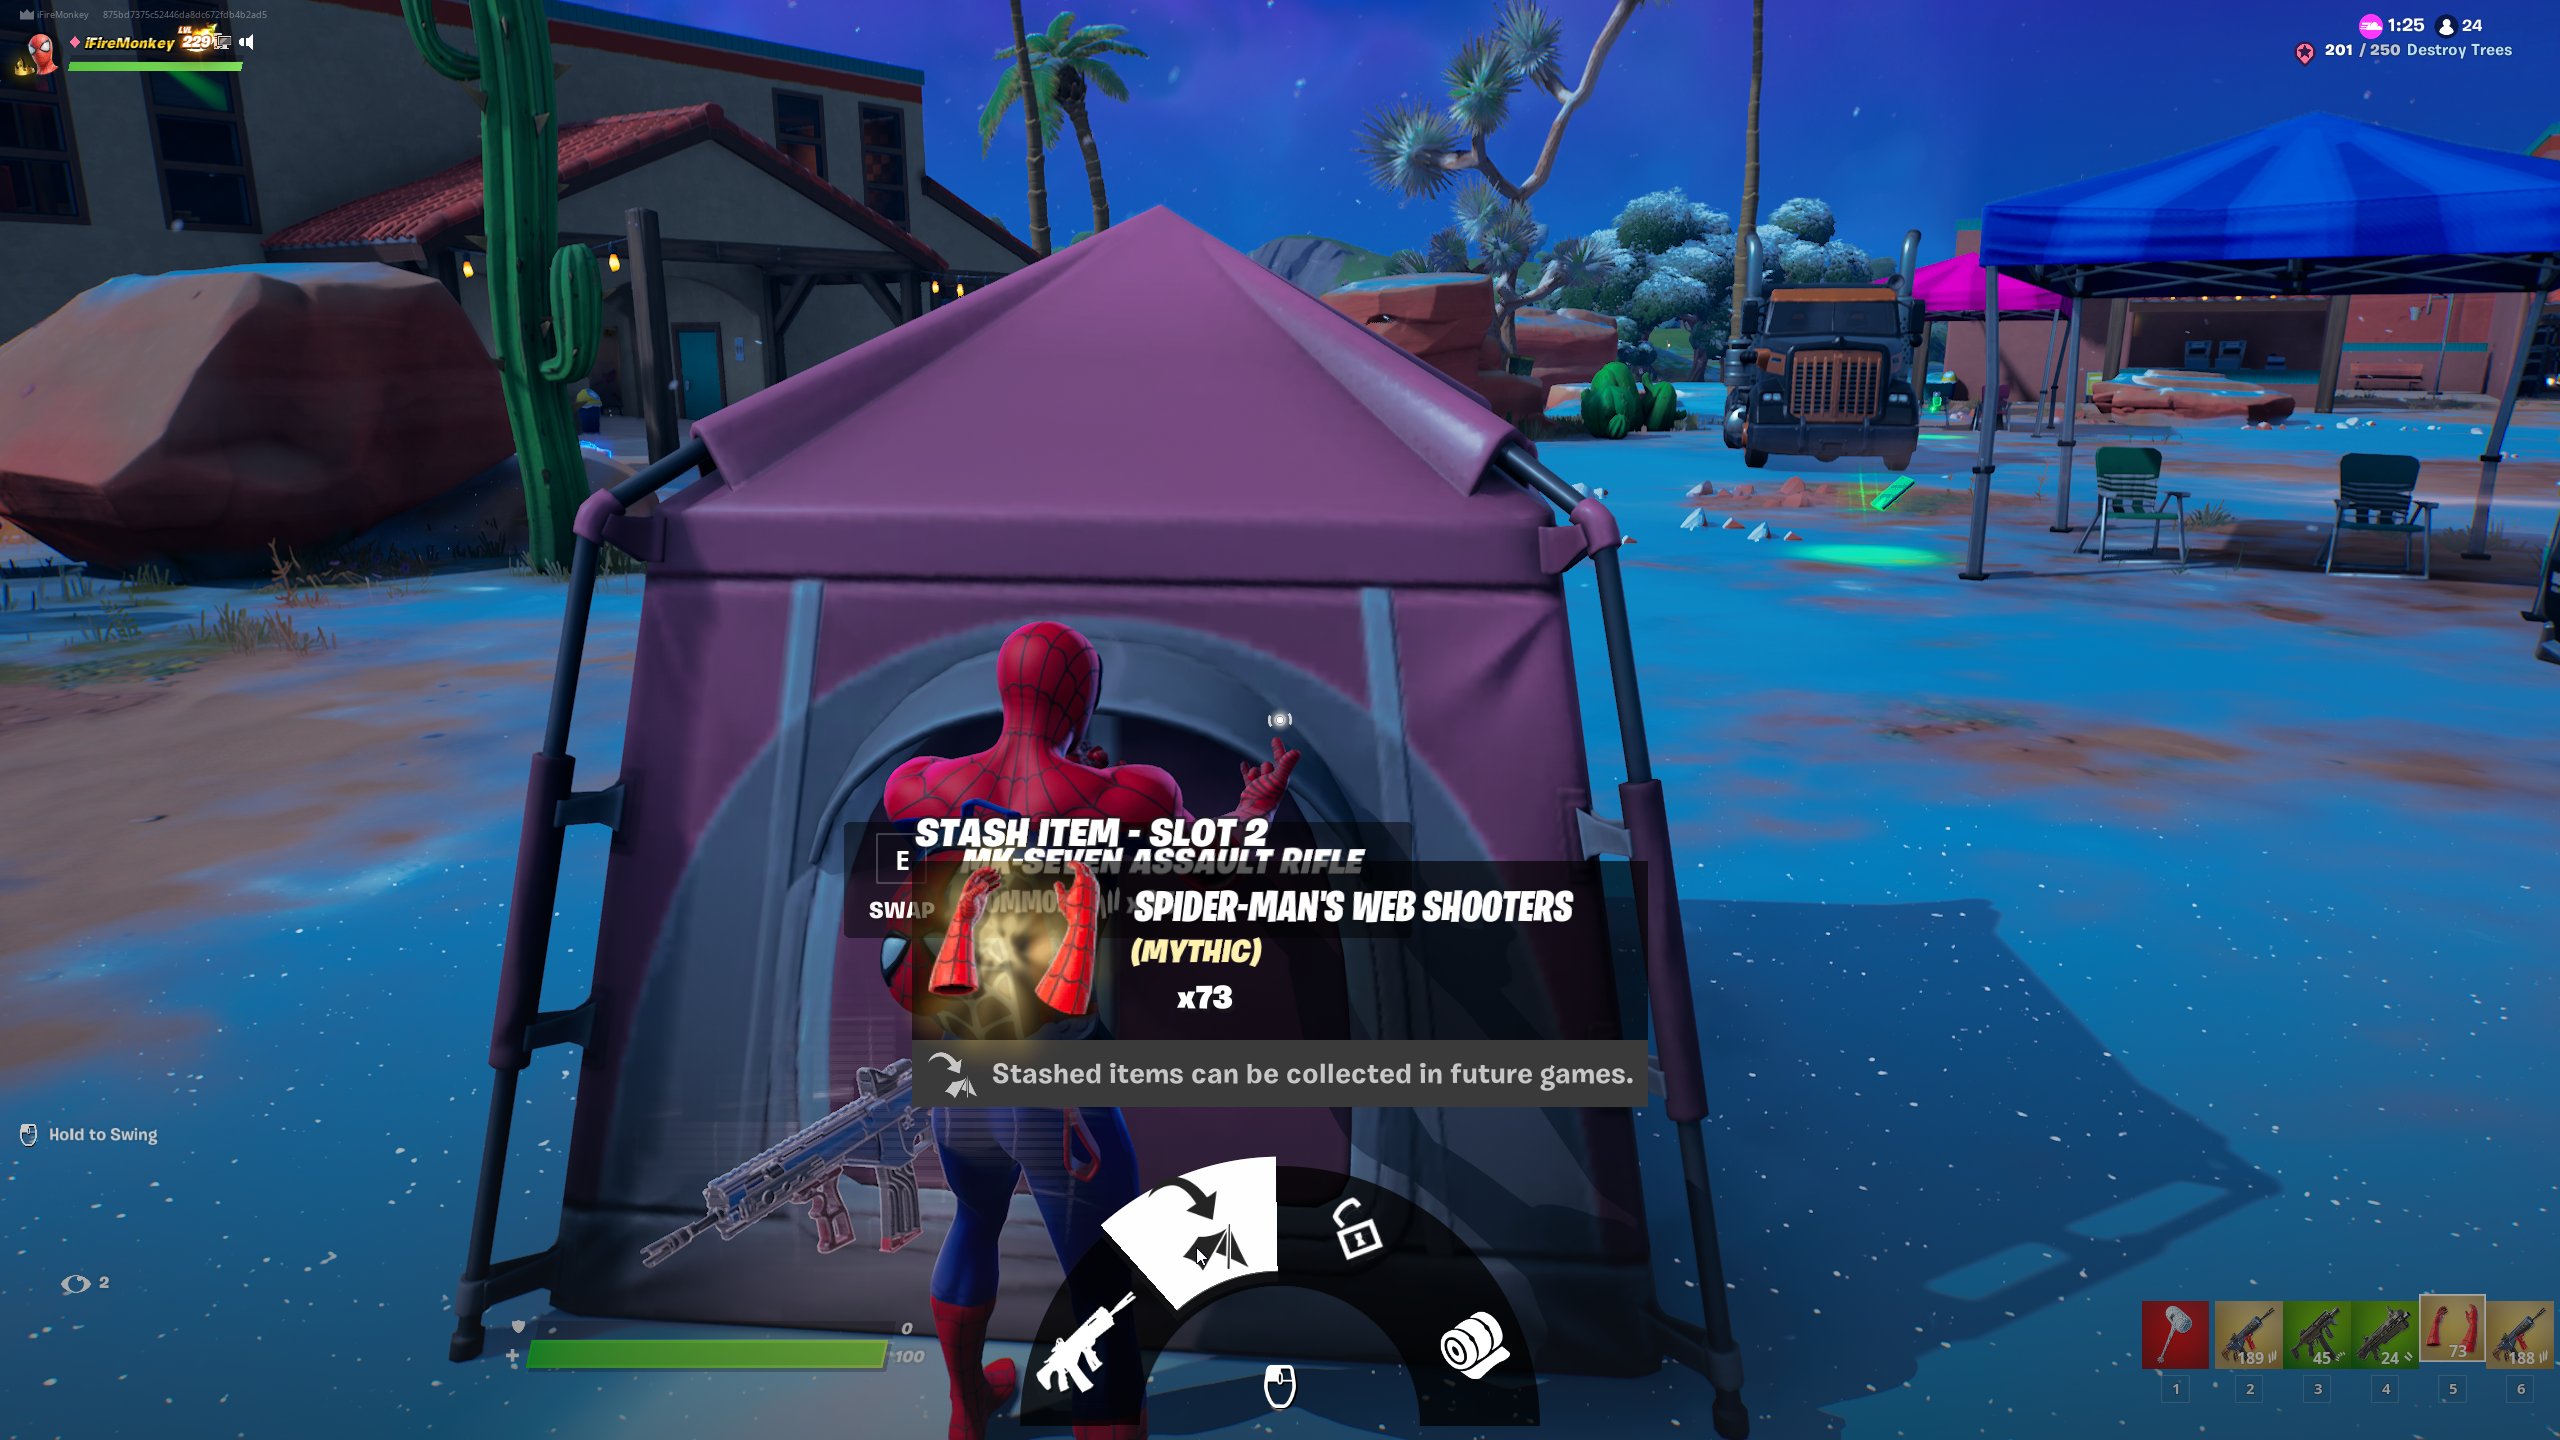 Where to find Spider-Man's Web Shooters in Fortnite? 